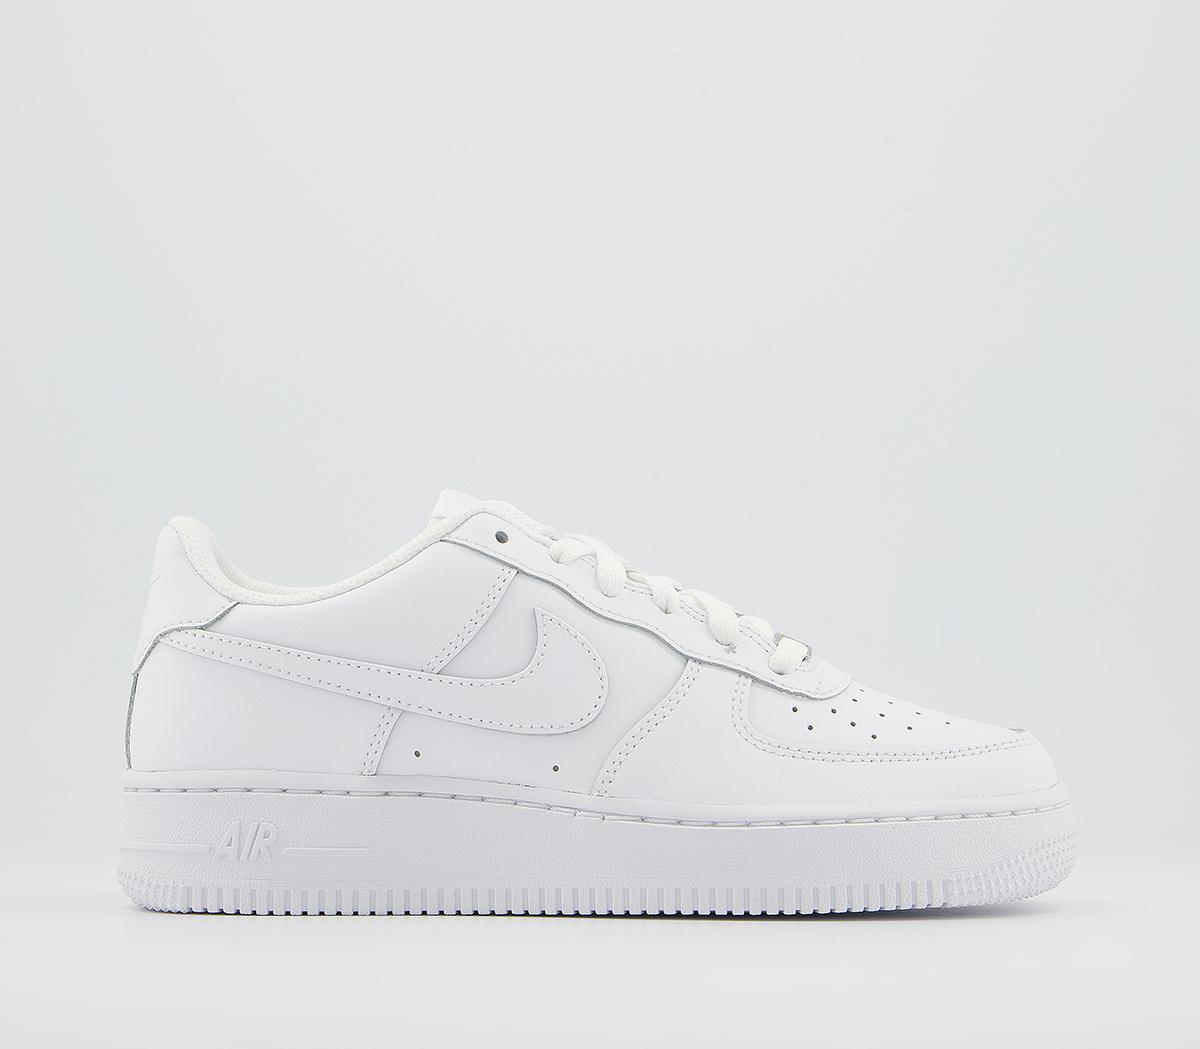 white and black air force junior